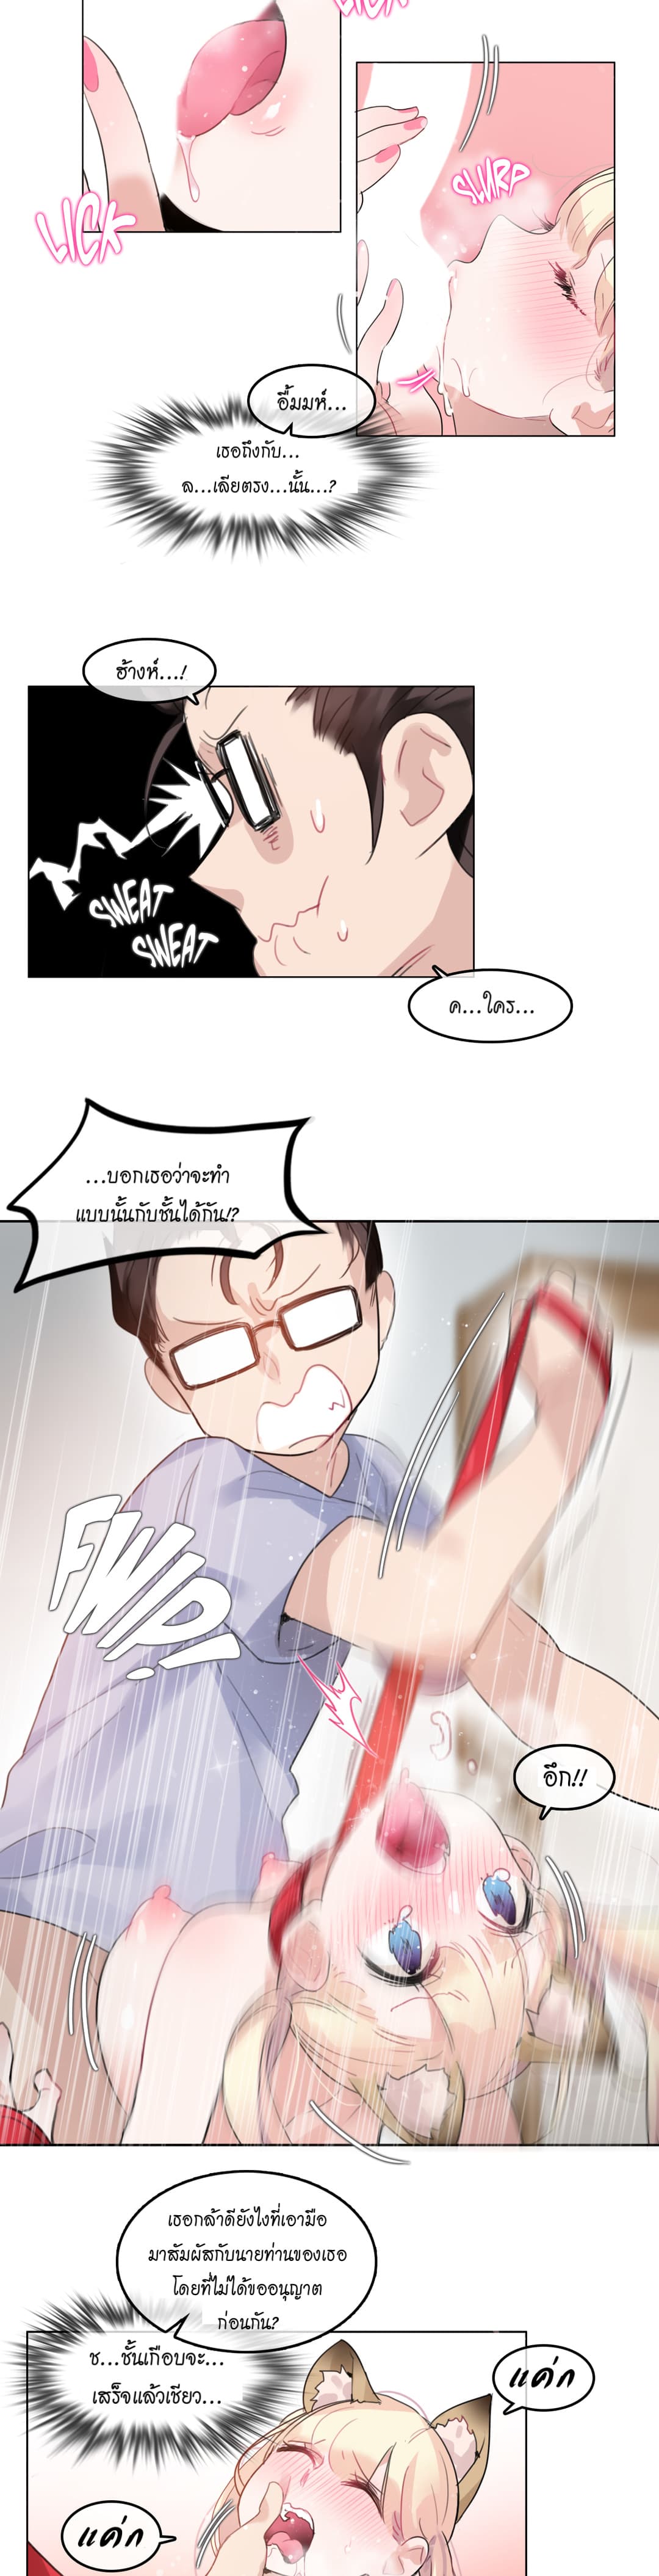 A Pervert’s Daily Life 40 (3)